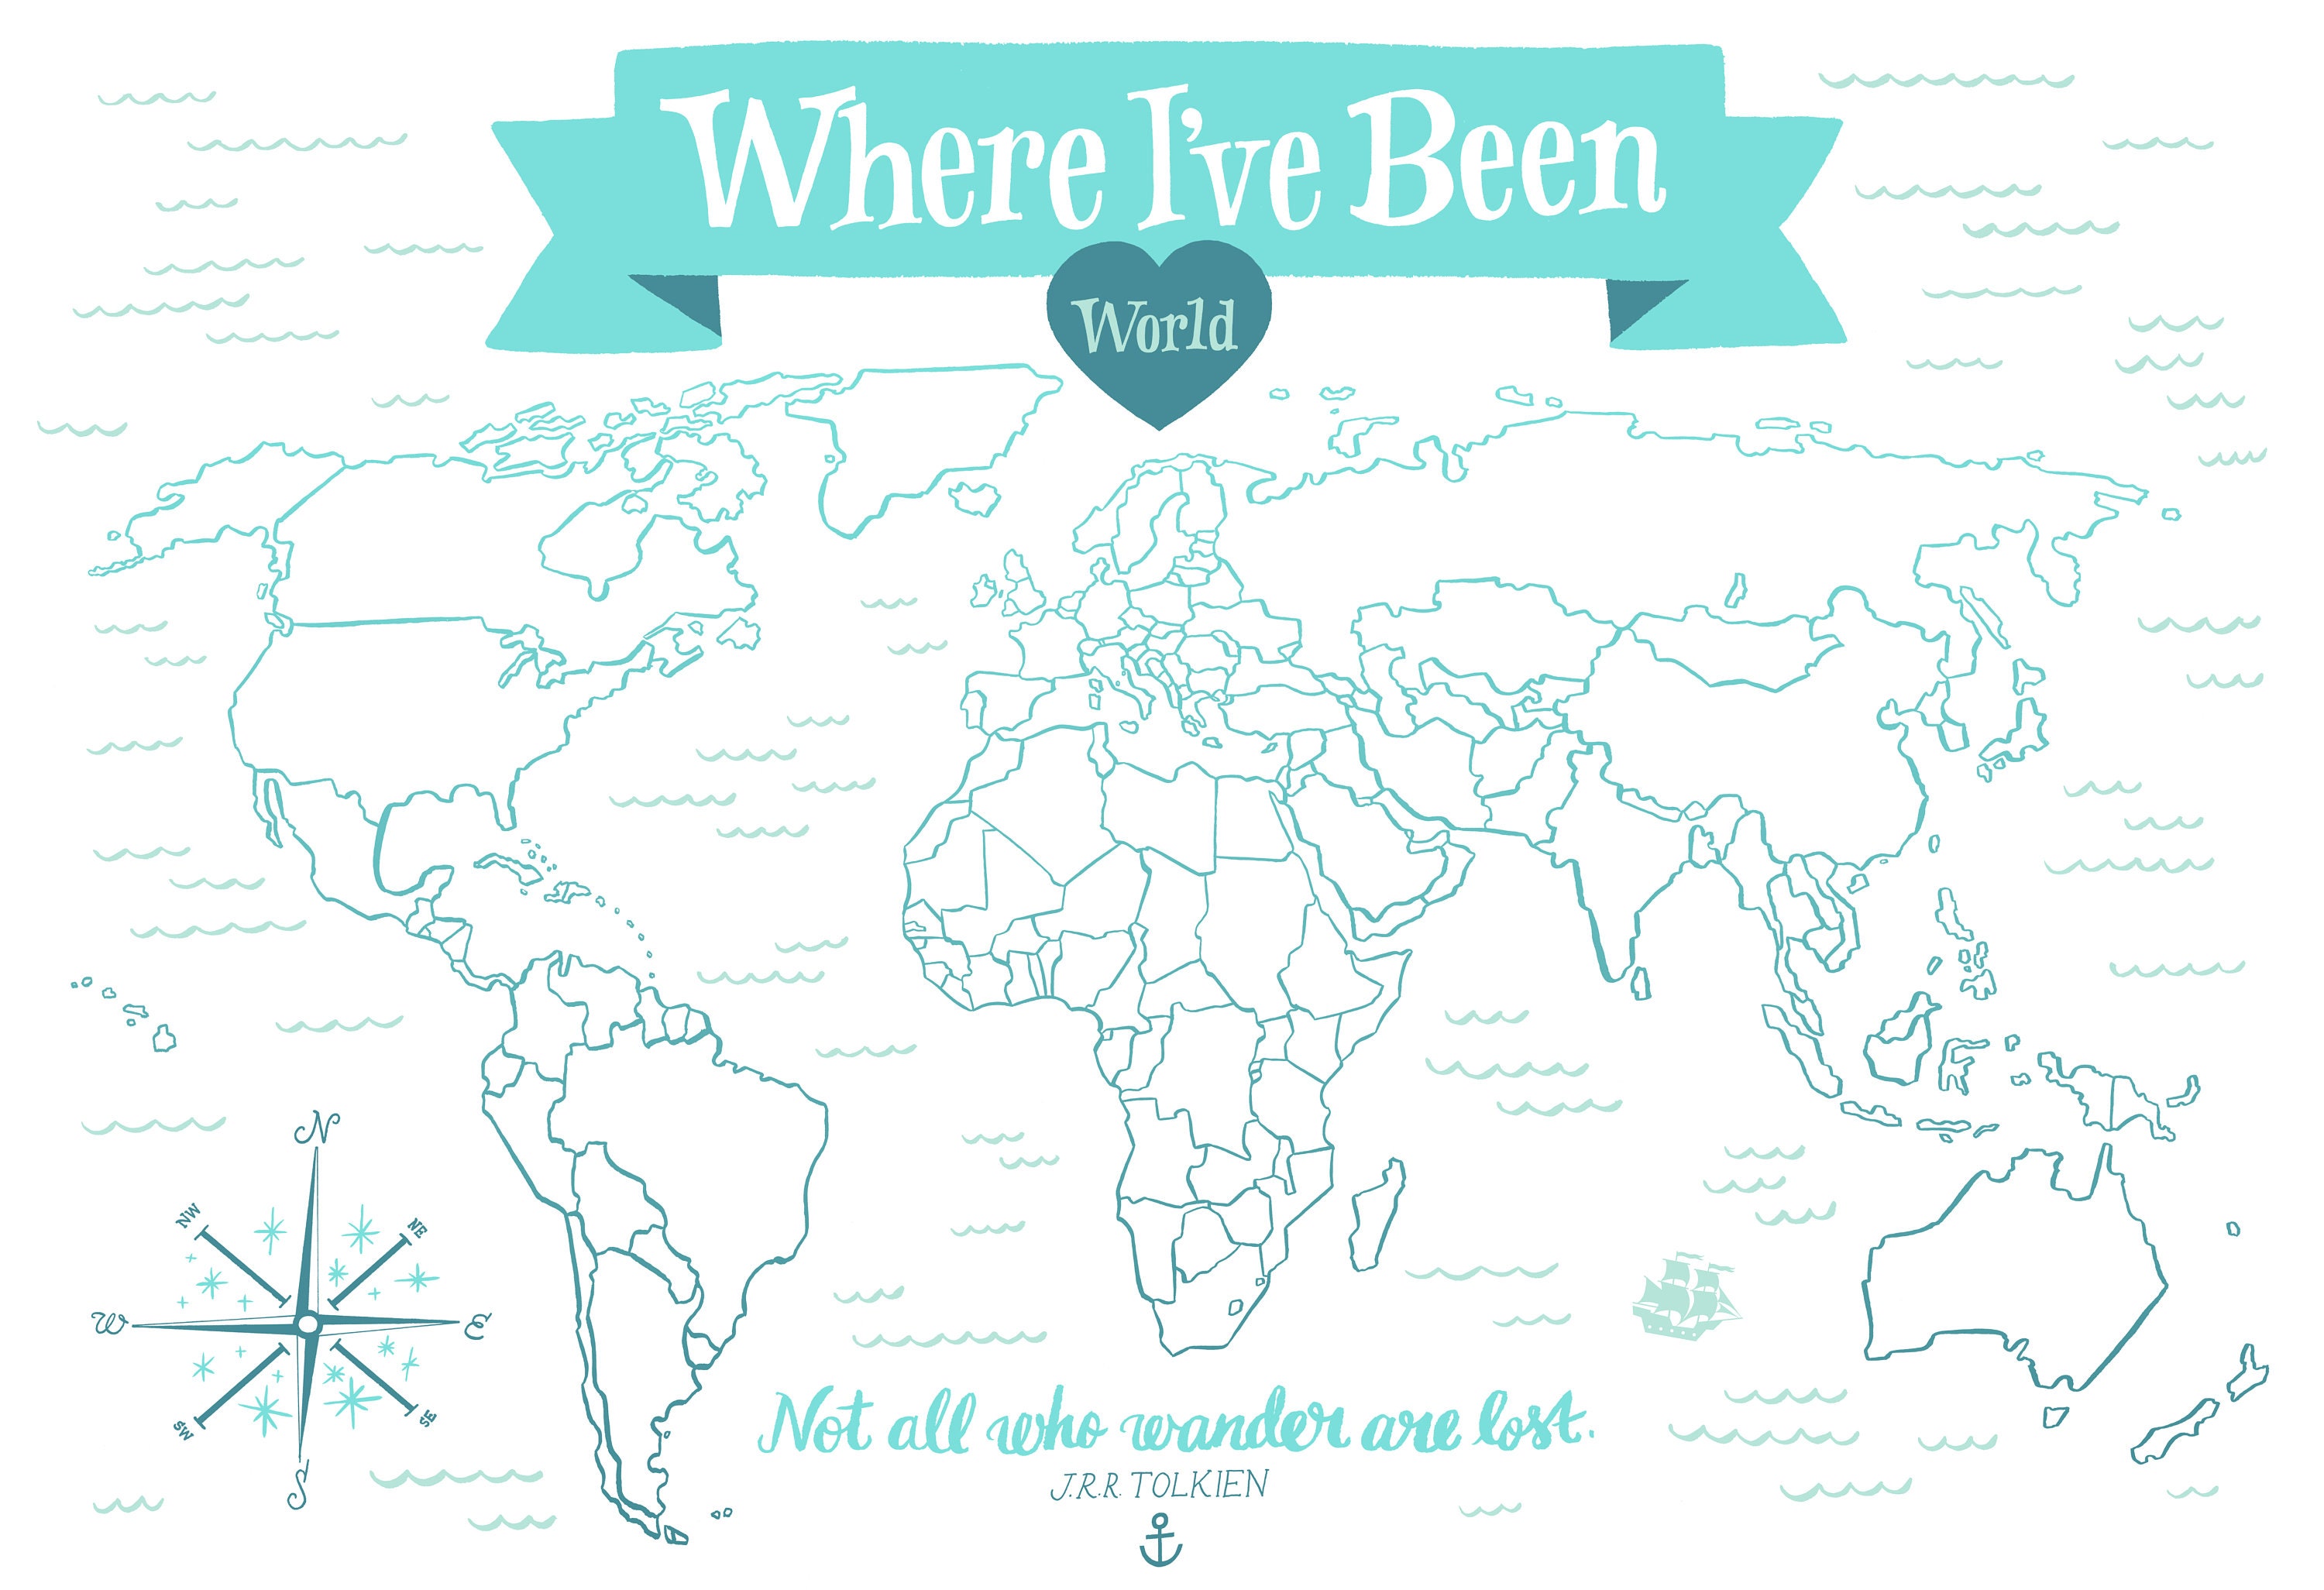 Where in the world can